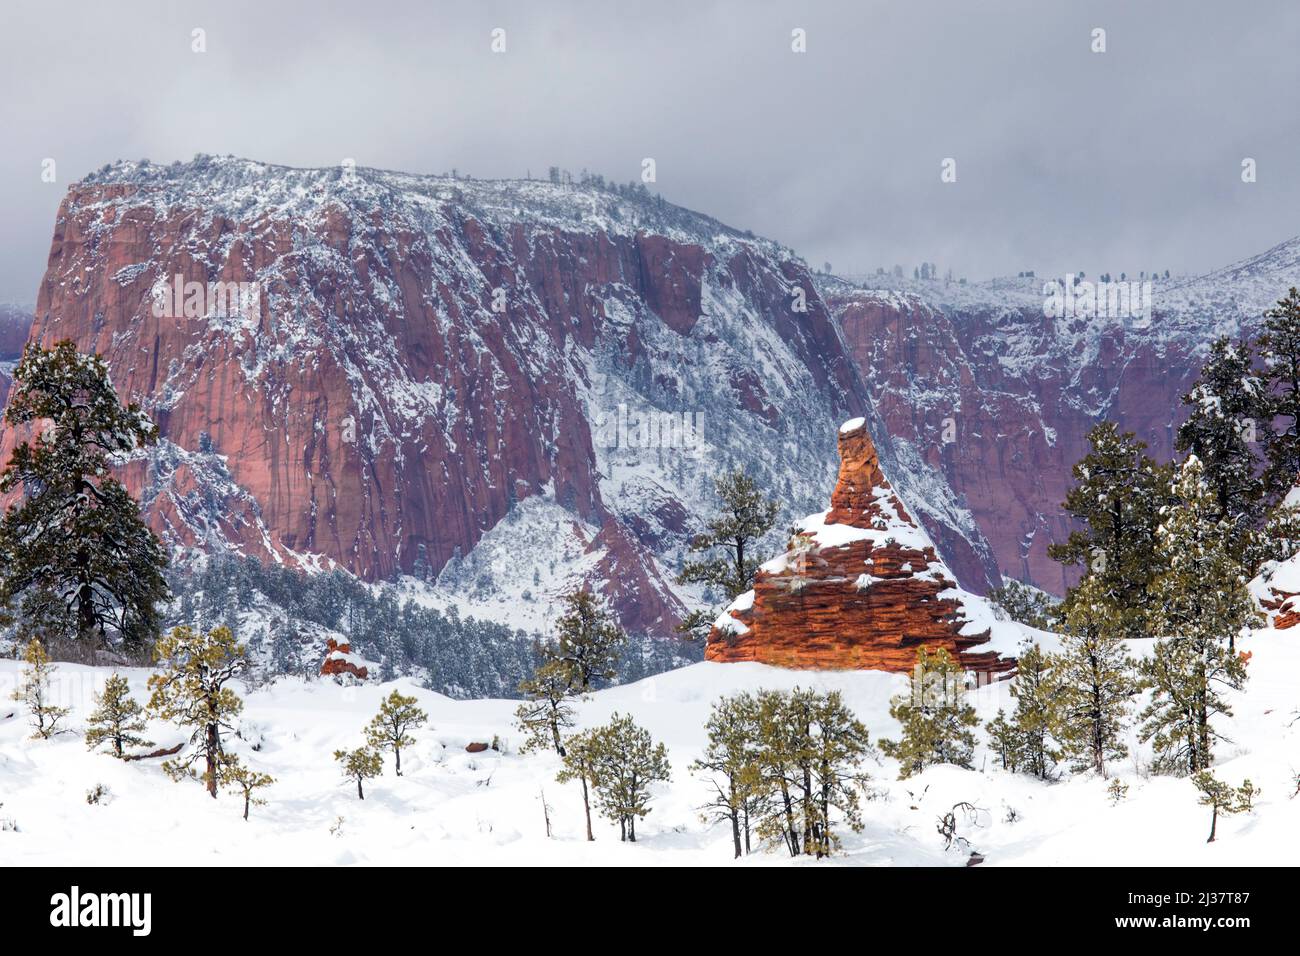 Fresh snow has fallen on the Kolob Terrace area in and around Zion National Park, Utah. Stock Photo